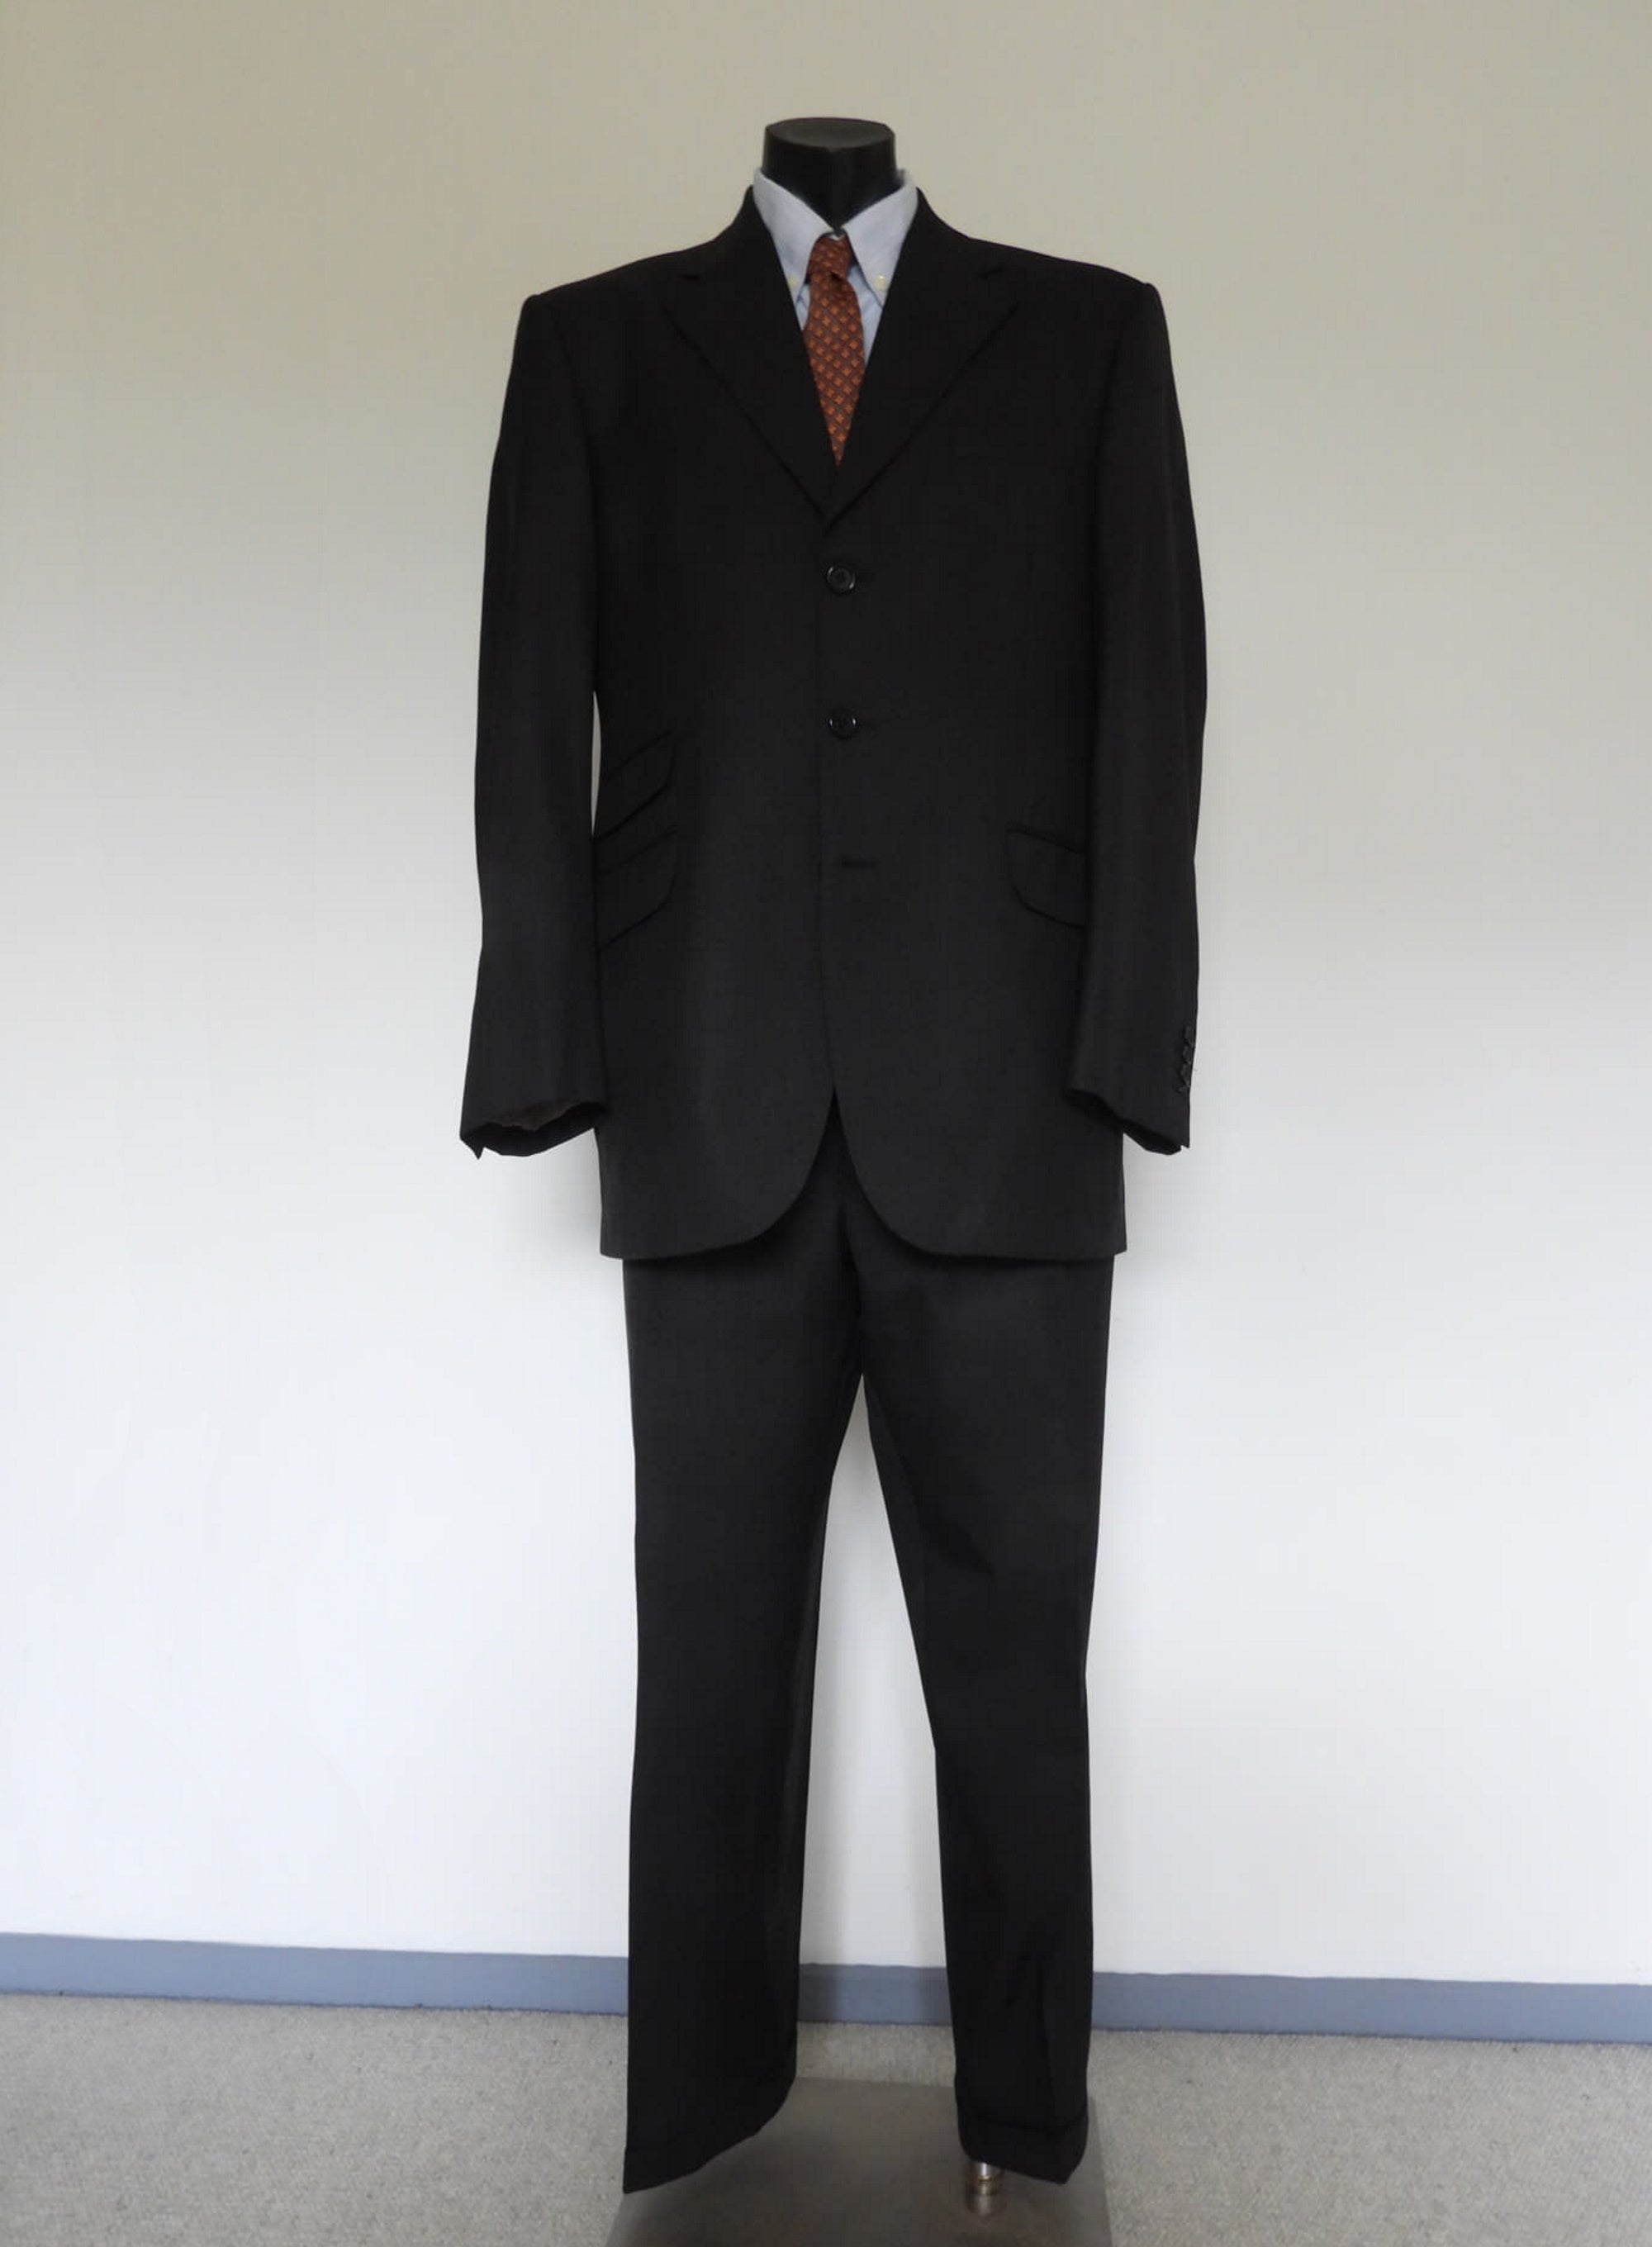 Charcoal grey wool suit with pleat front cuffed pants by aquascutum size 42R